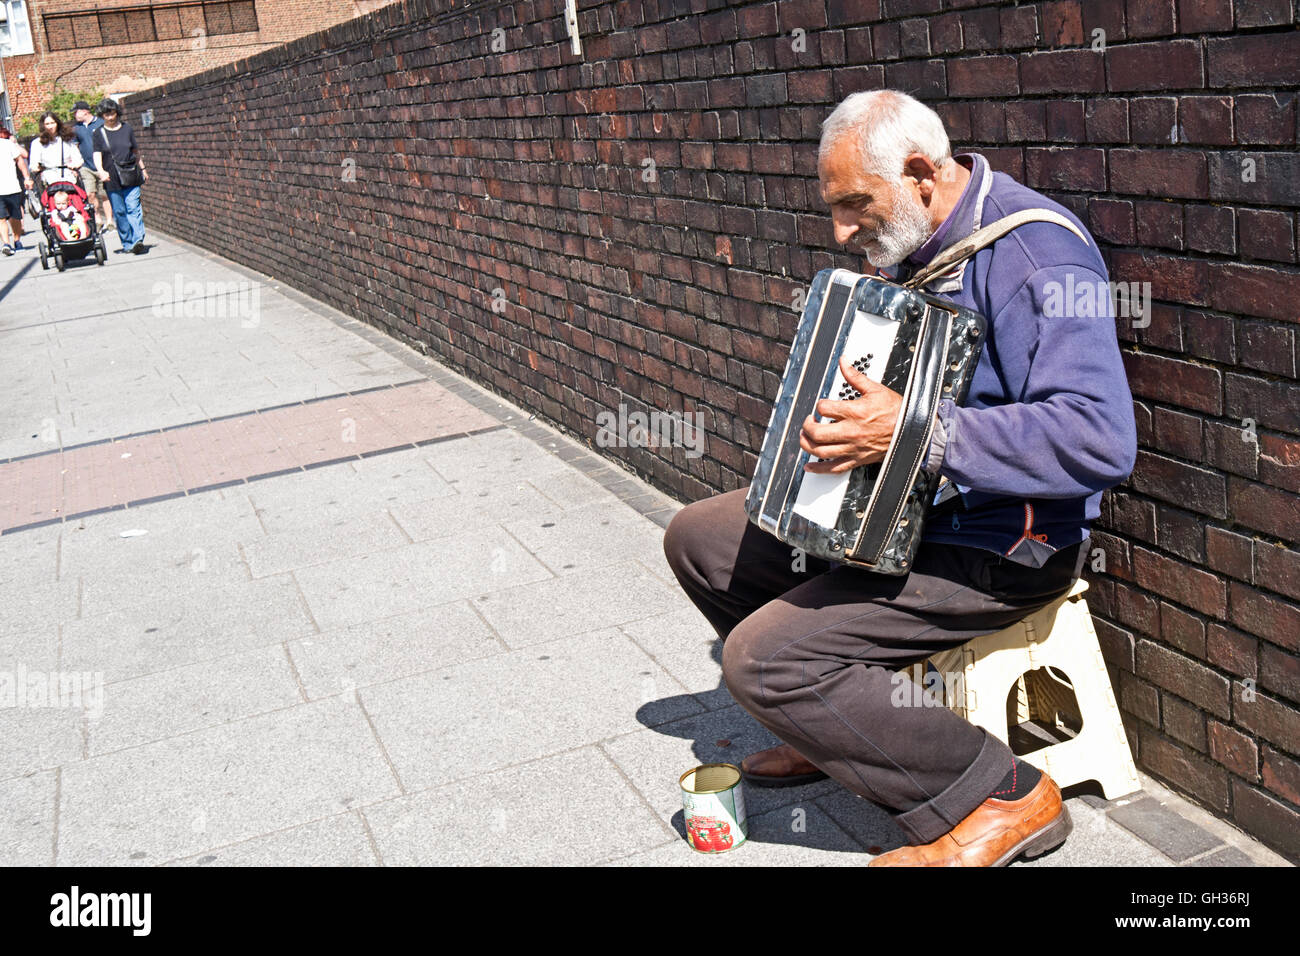 An elderly street busker plays an accordion for money on the streets of London Stock Photo